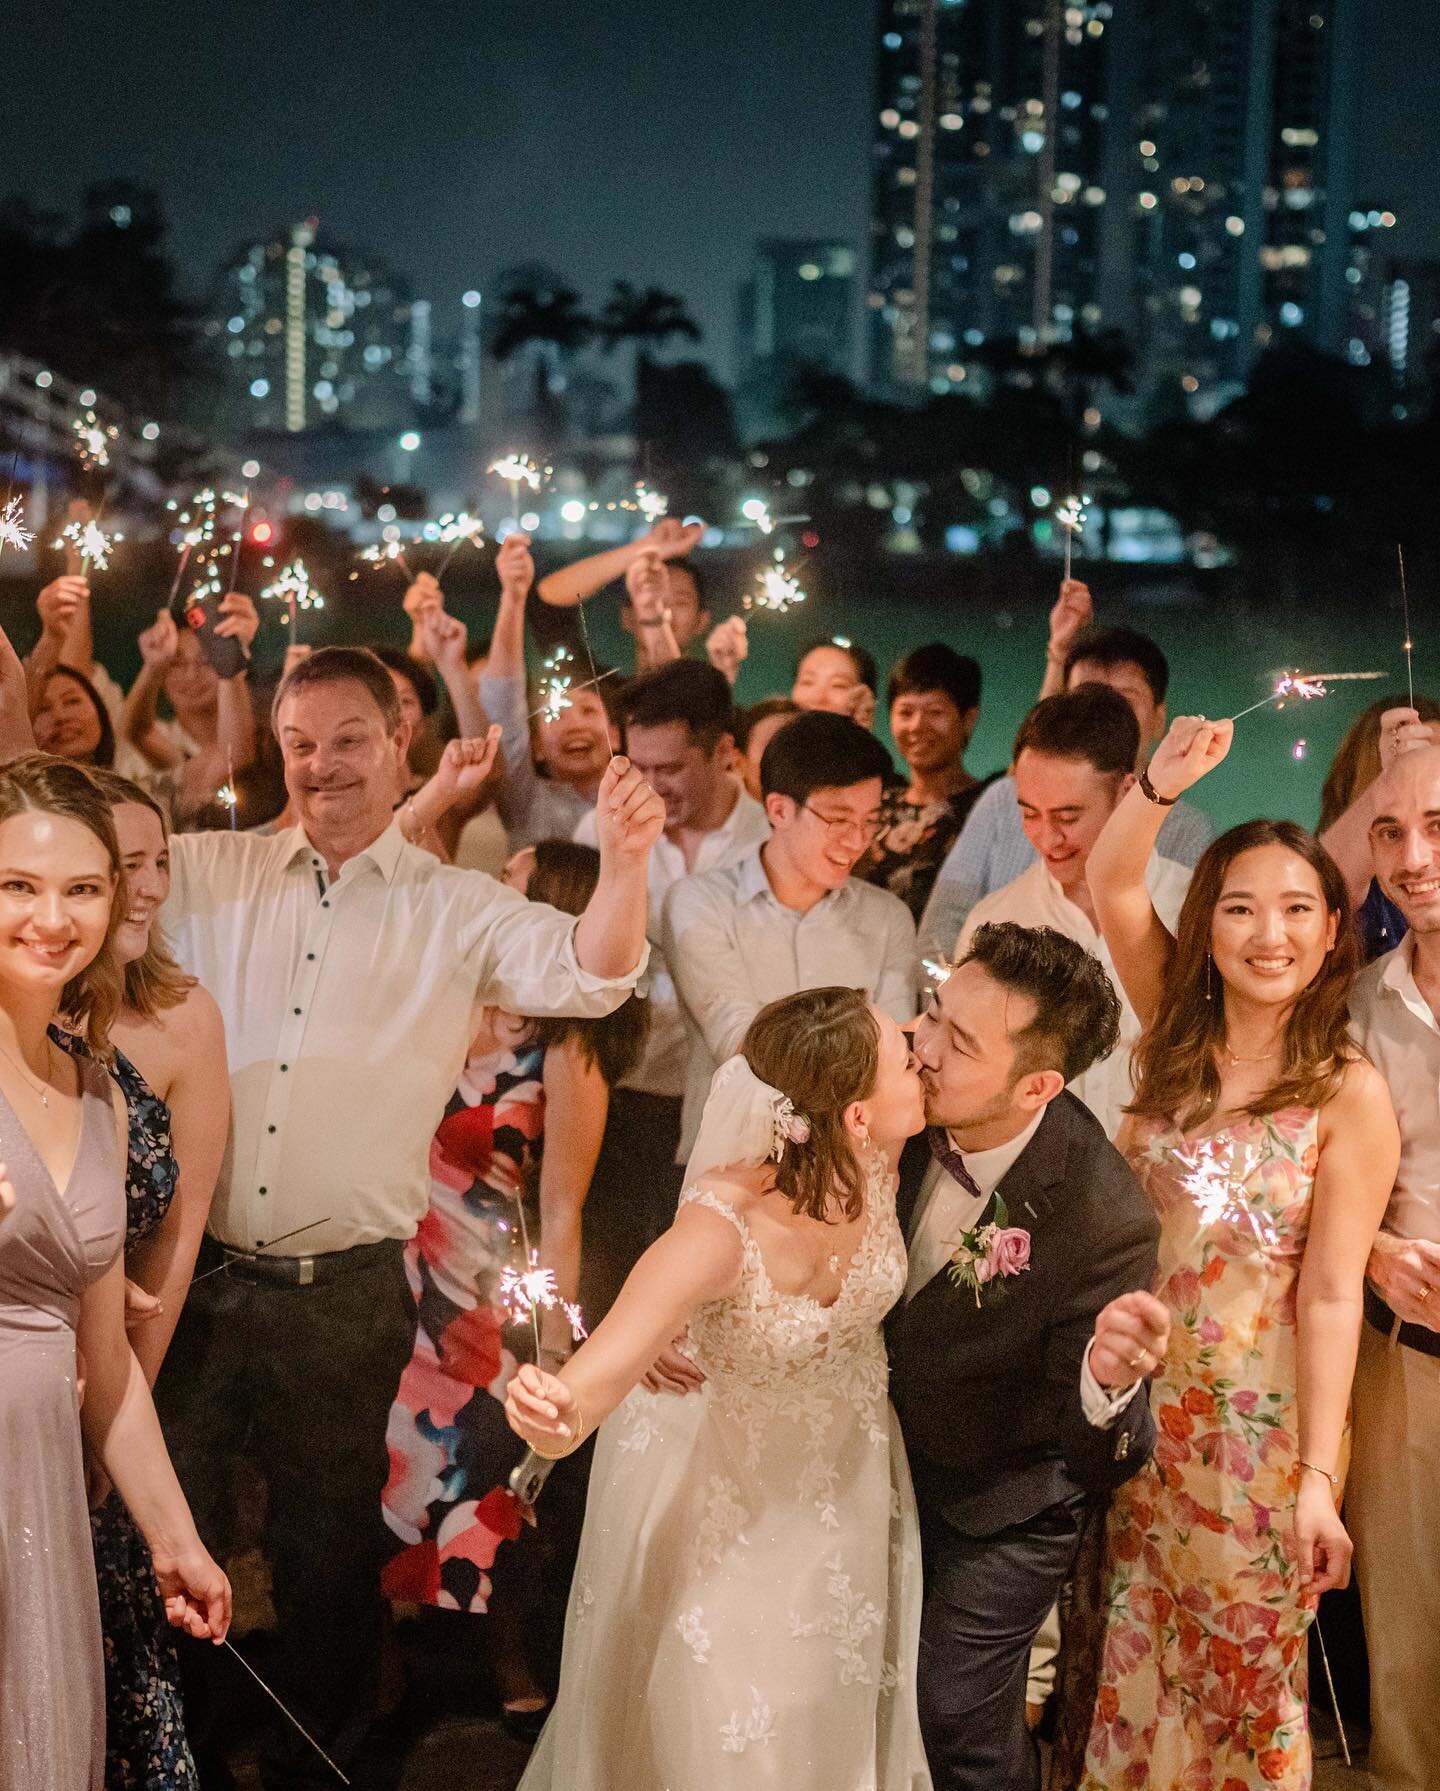 It was a picture-perfect day as we celebrated the beautiful union of Jason and Katrina at the Singapore Polo Club! 🐎 The stunning venue was the perfect backdrop for their special day - from the heartfelt ceremony to the lively reception, there was n